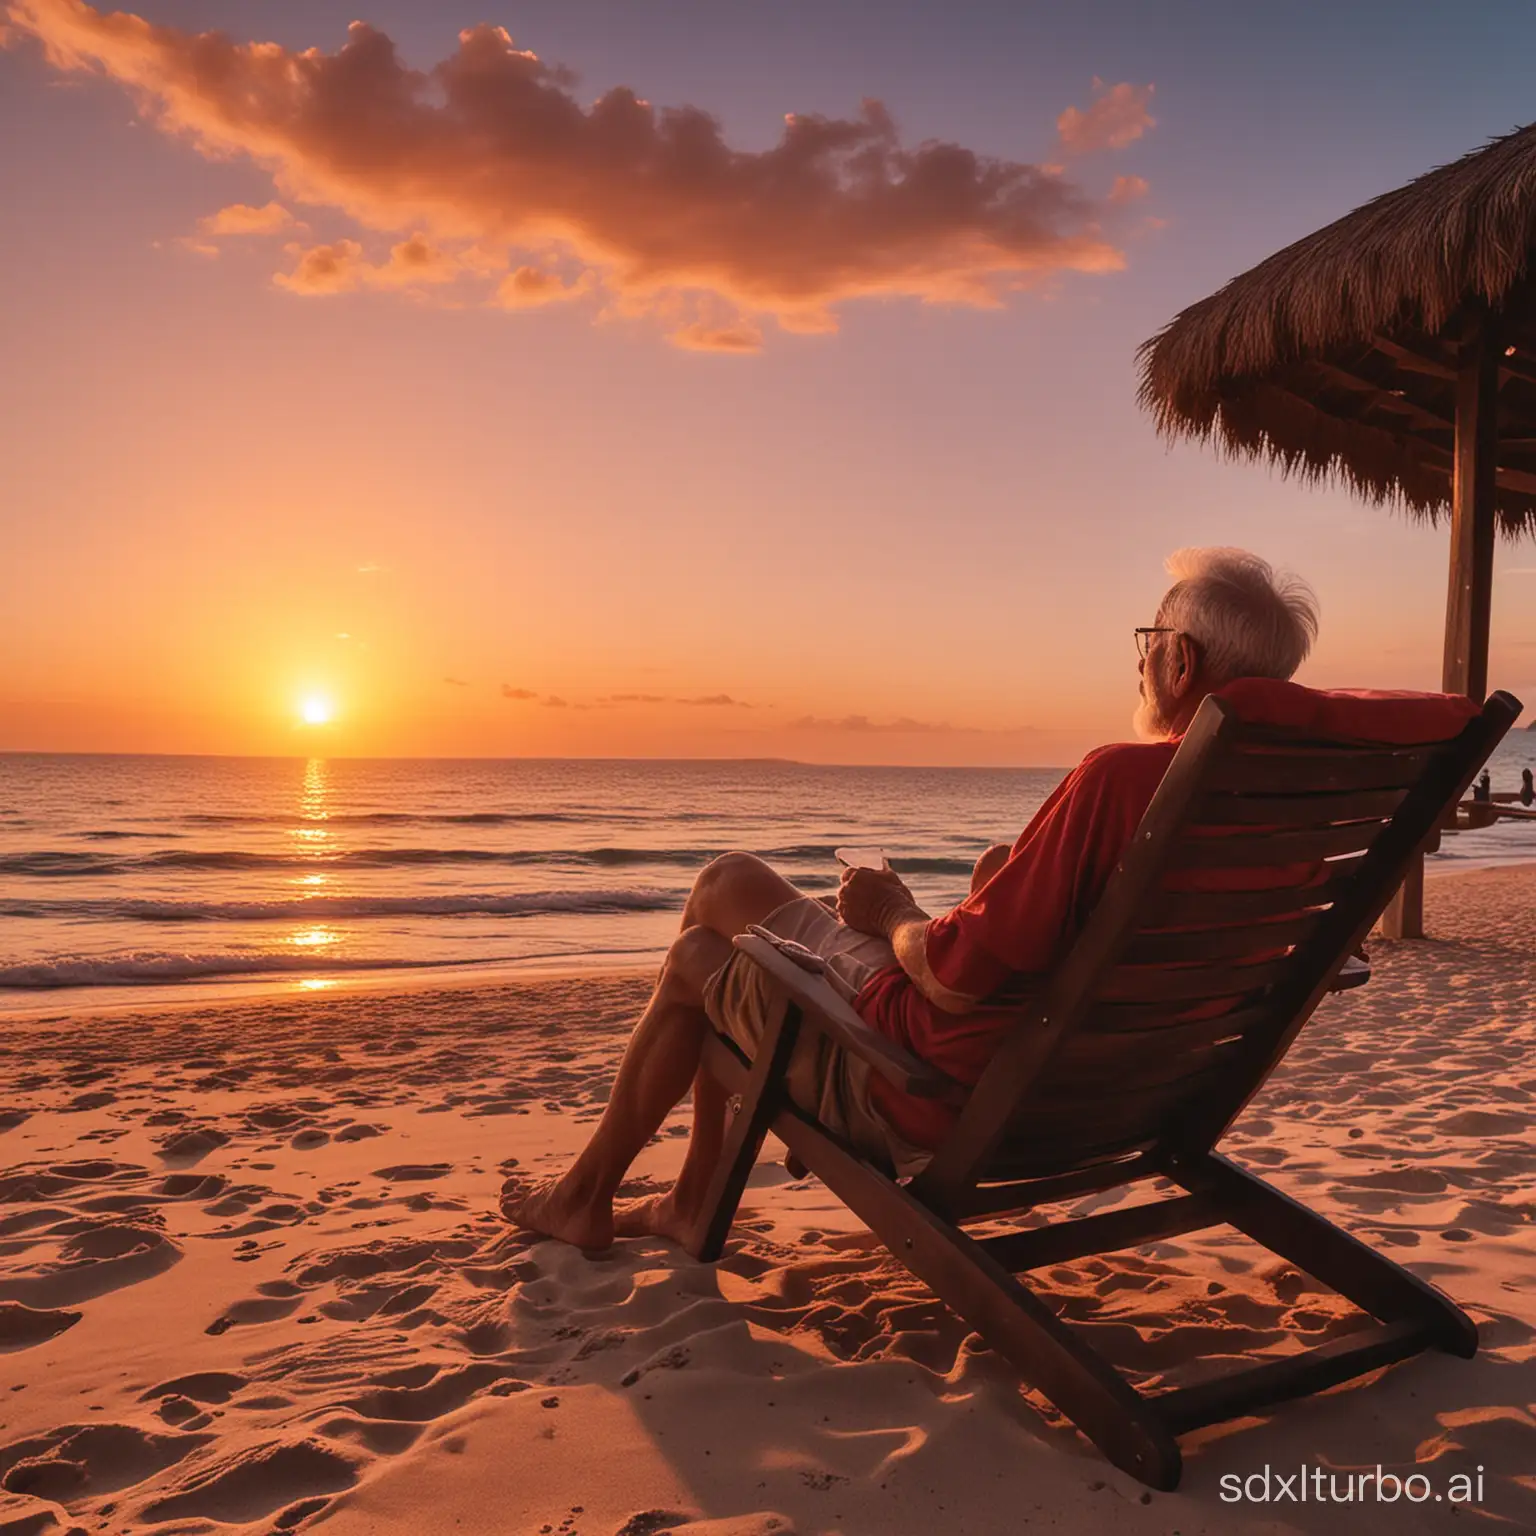 The old man lay on the lounge chair, gazing at the big red sunset.